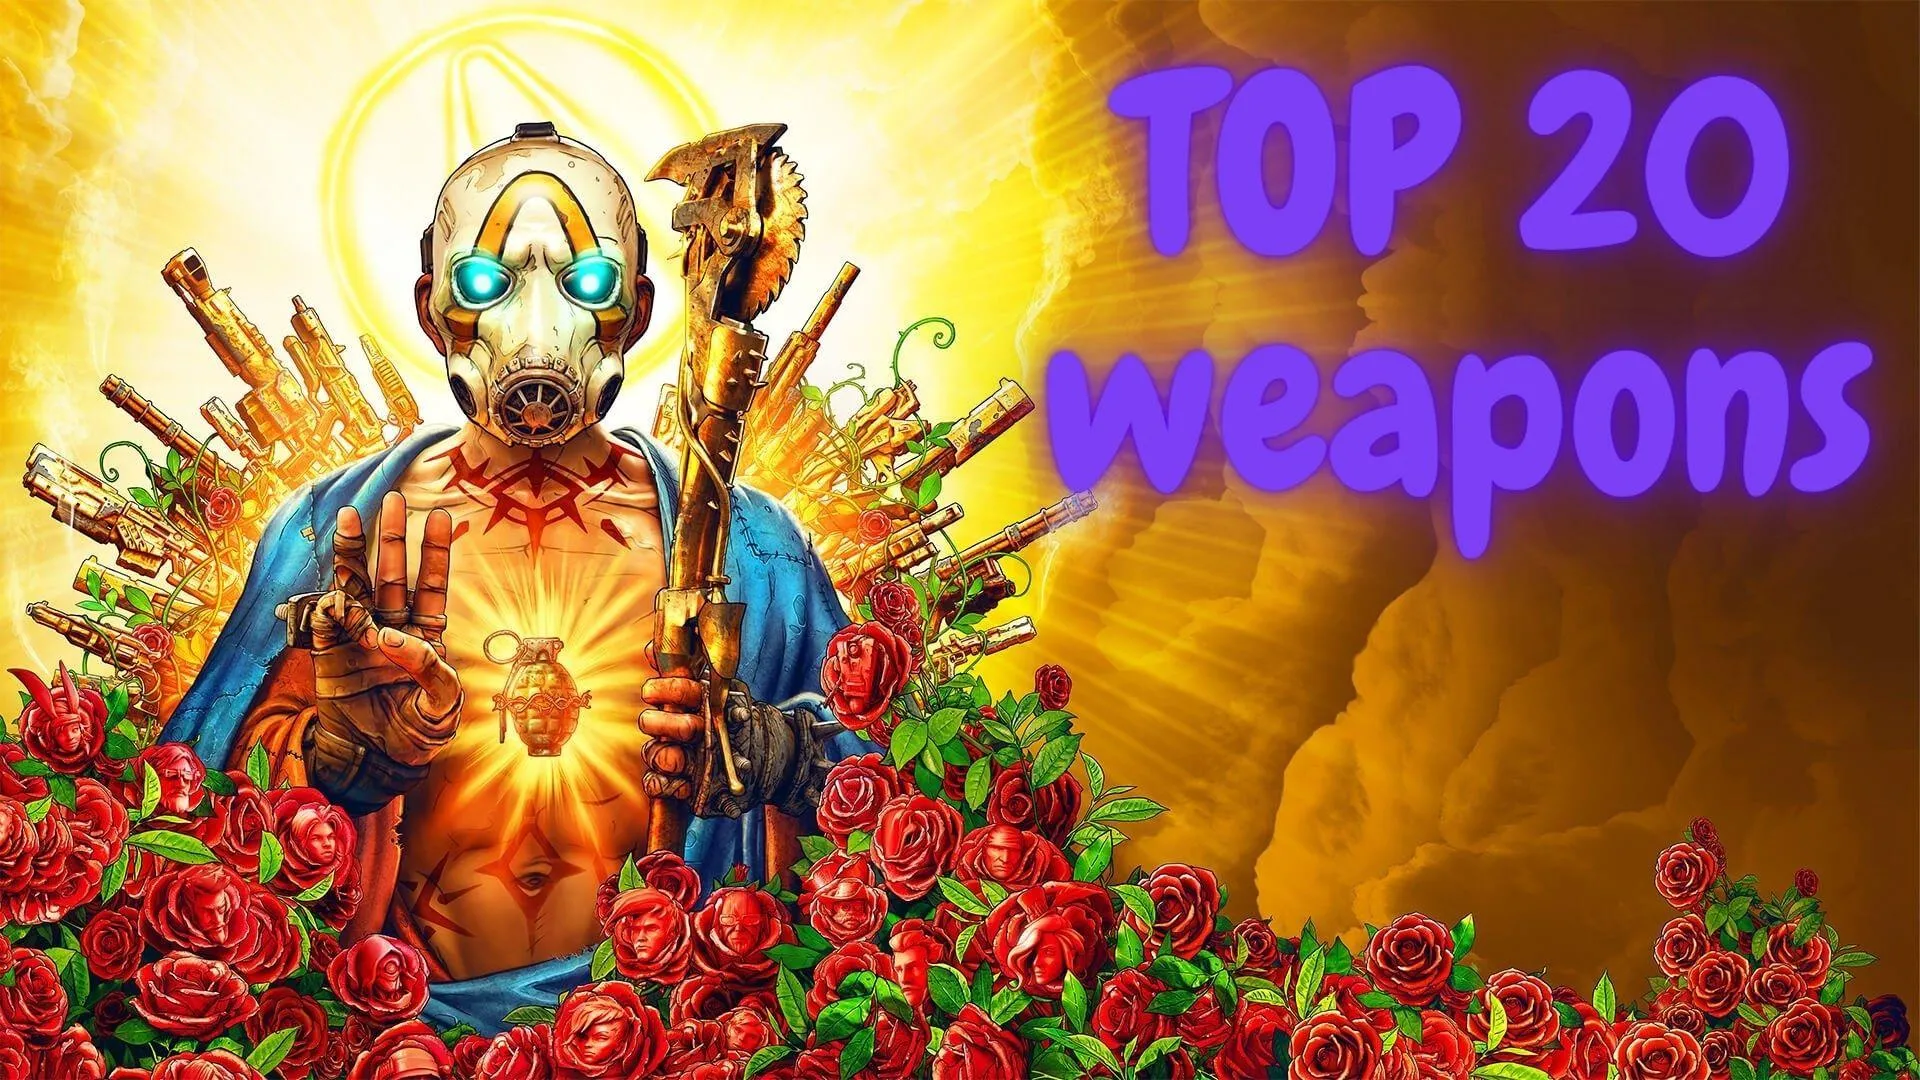 TOP 20 Weapons in Borderlands 3 [March 2021]